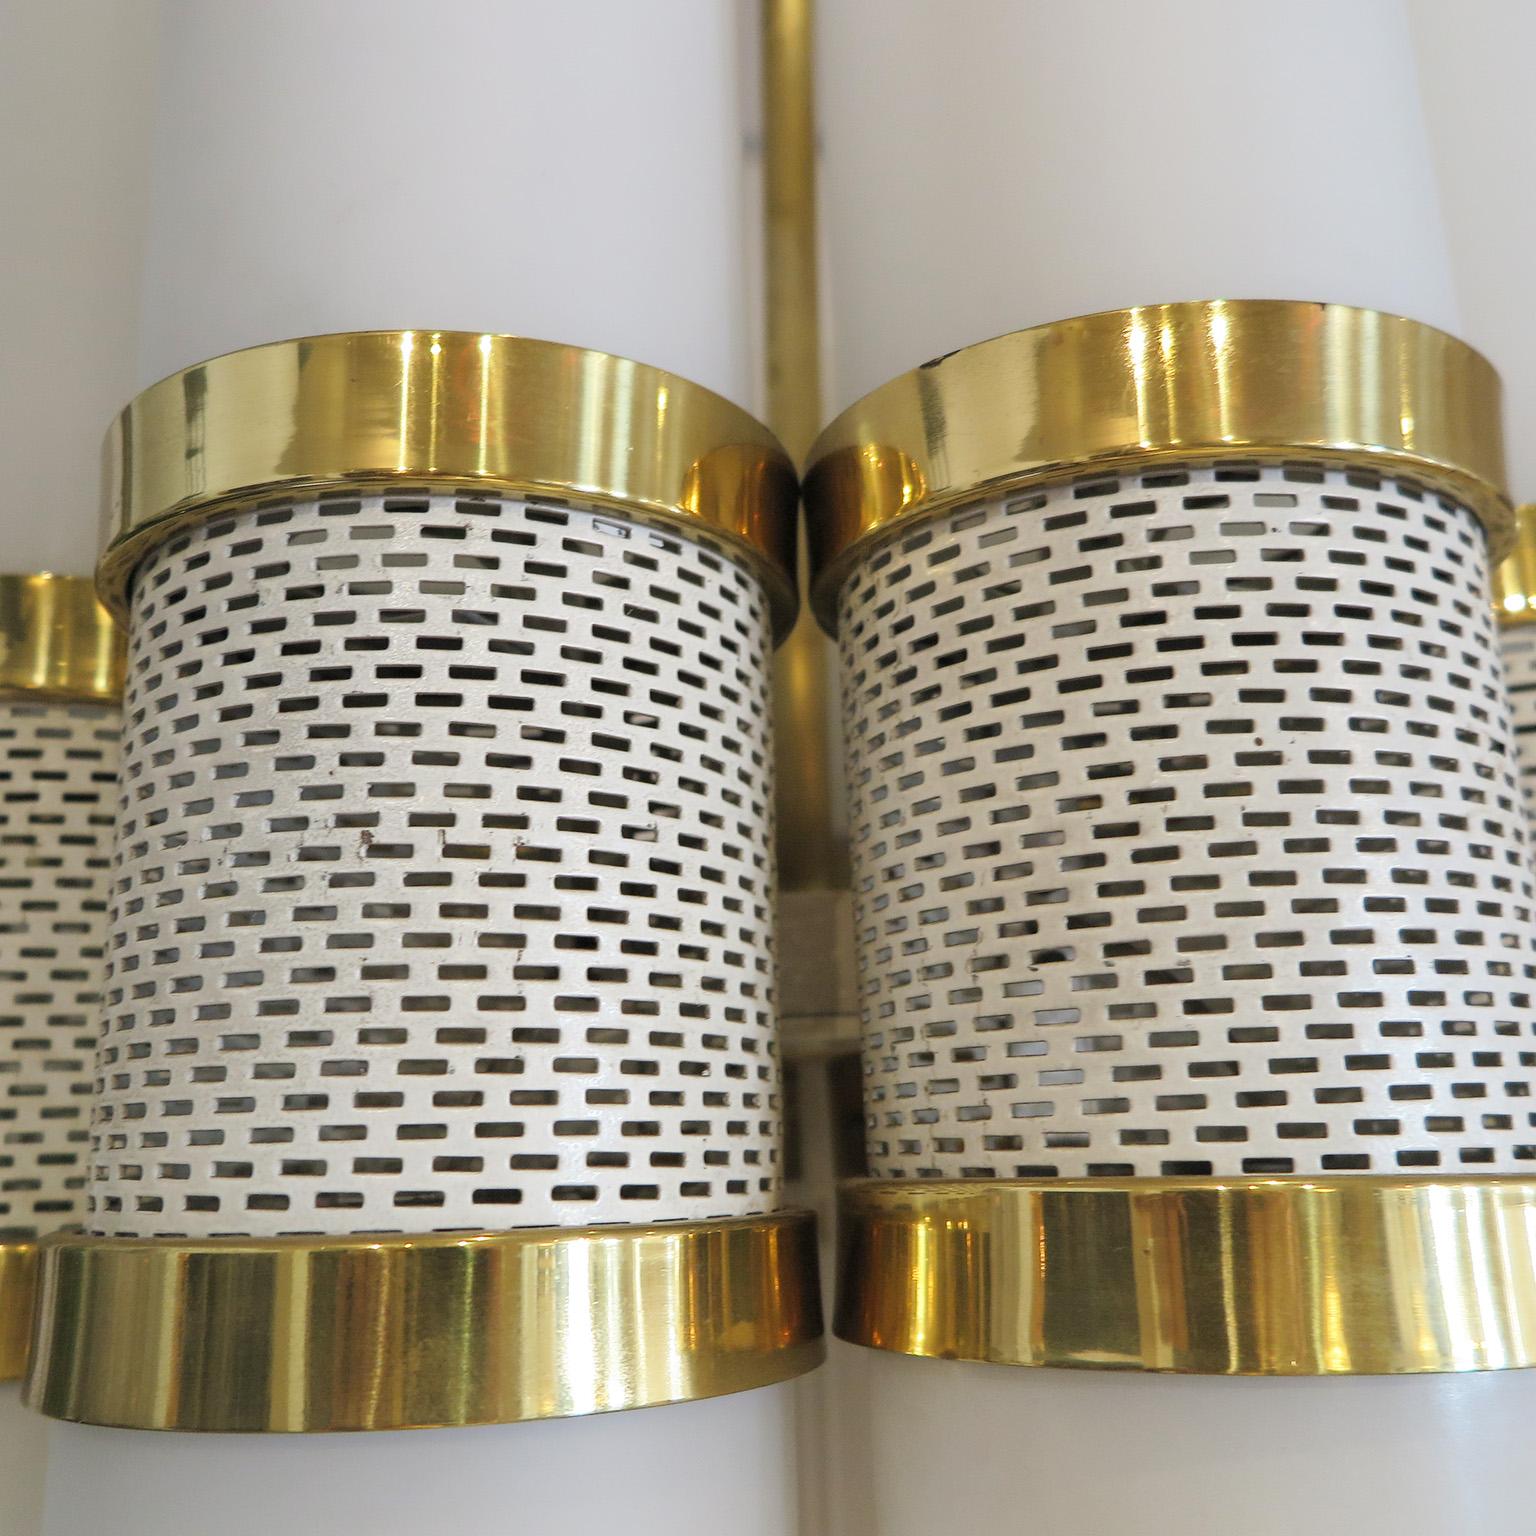 Pair of Cylindrical Chandeliers in Milk Glass and Brass, Germany c. 1960's For Sale 1